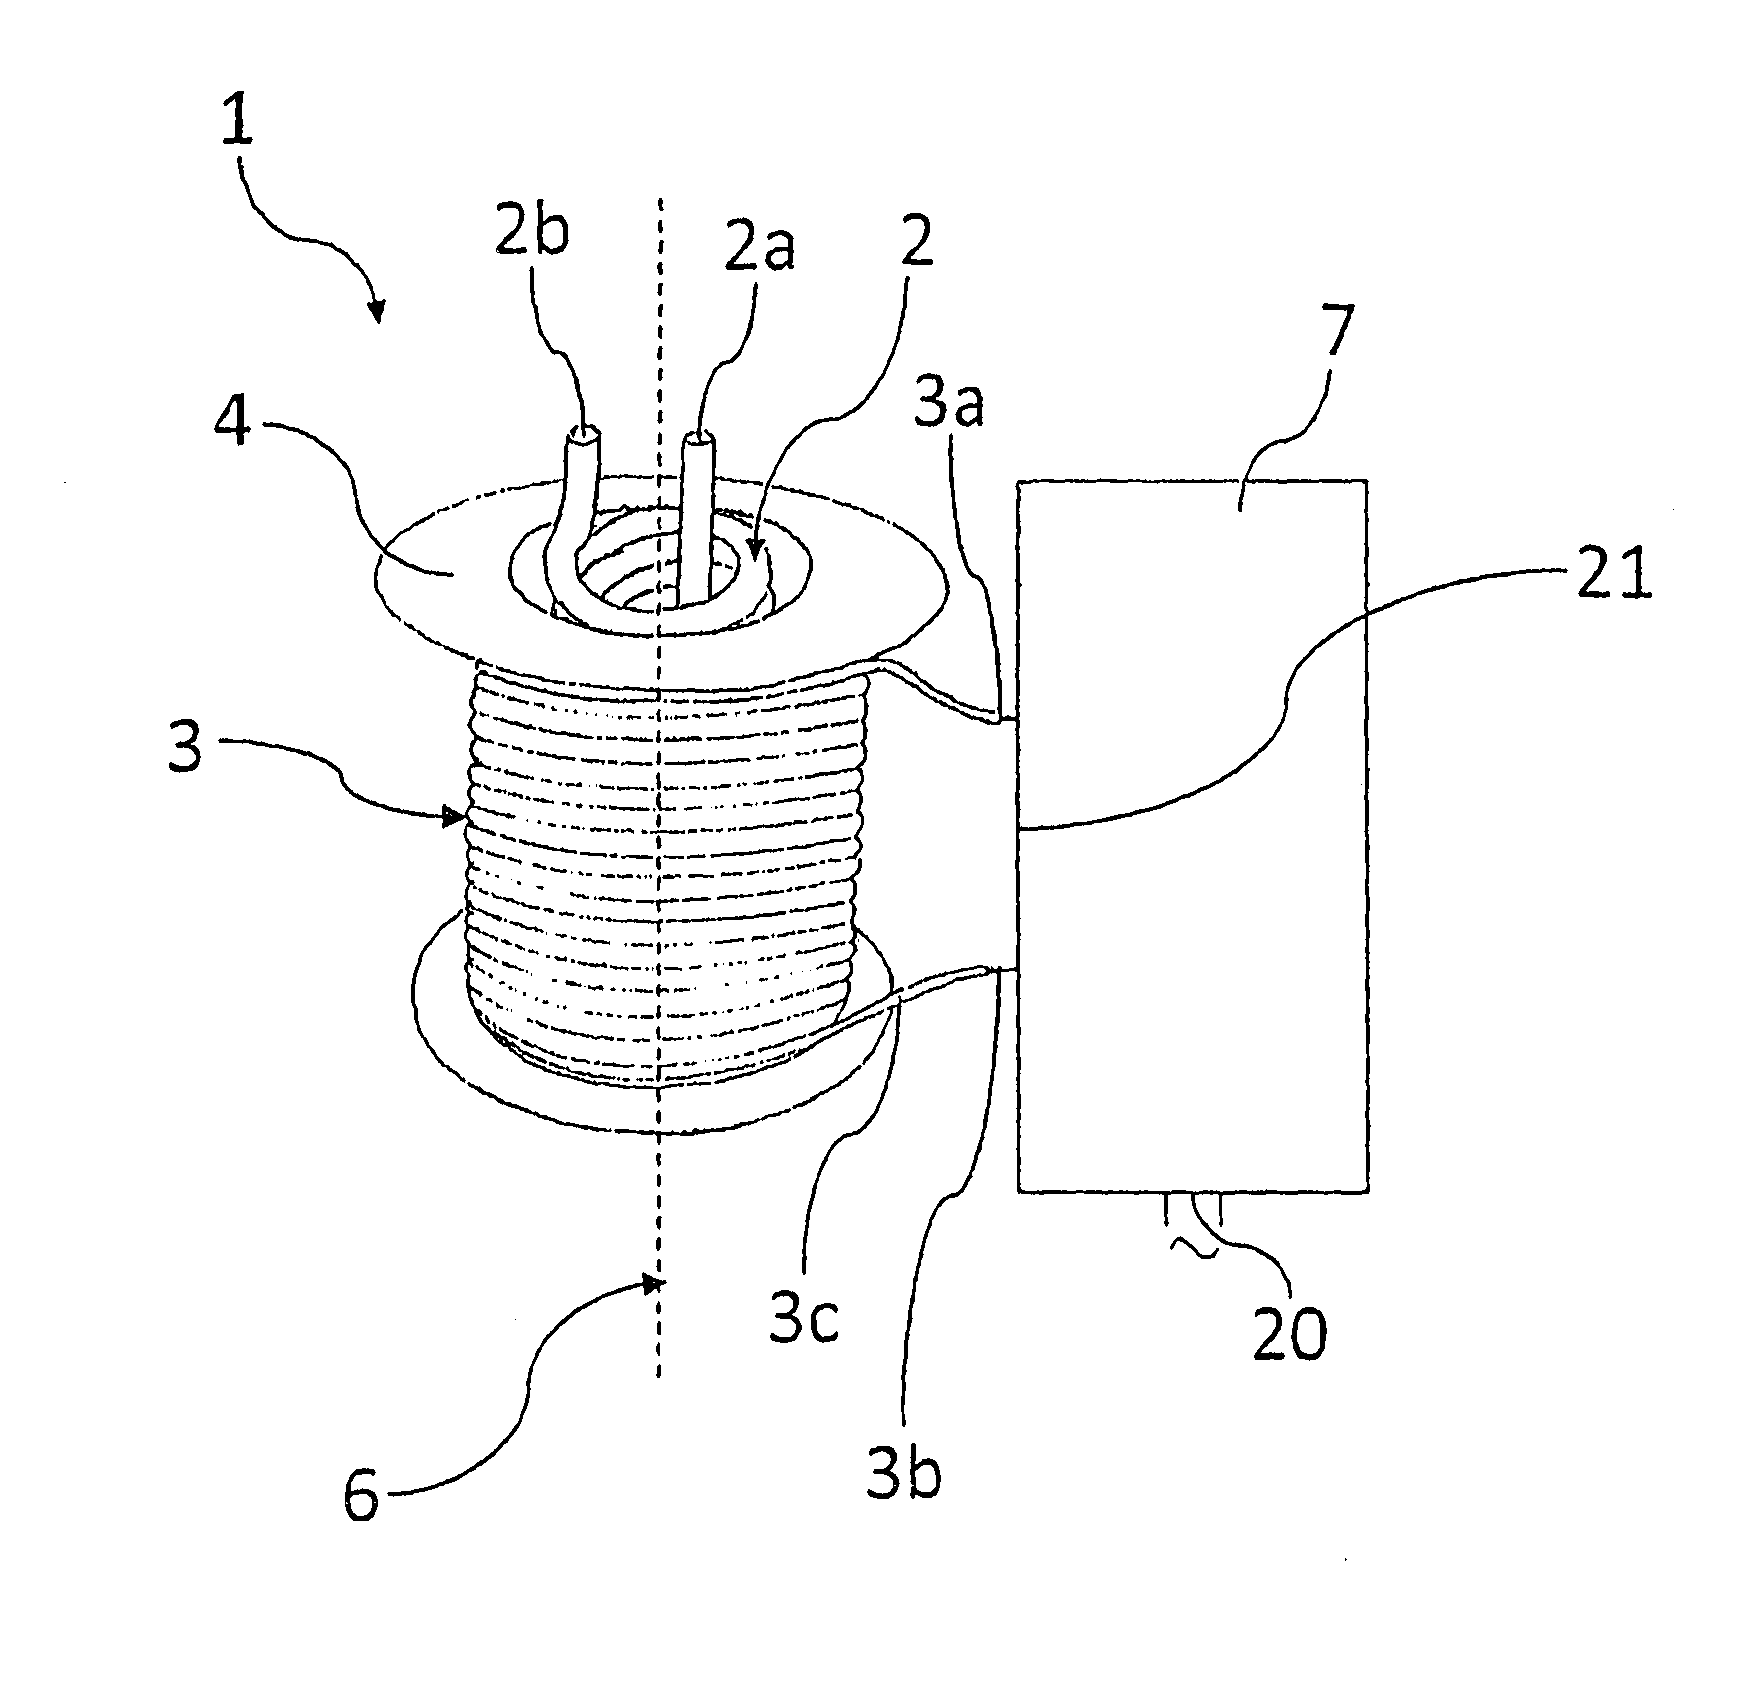 Device and method for heating water in a machine for making and dispensing drinks